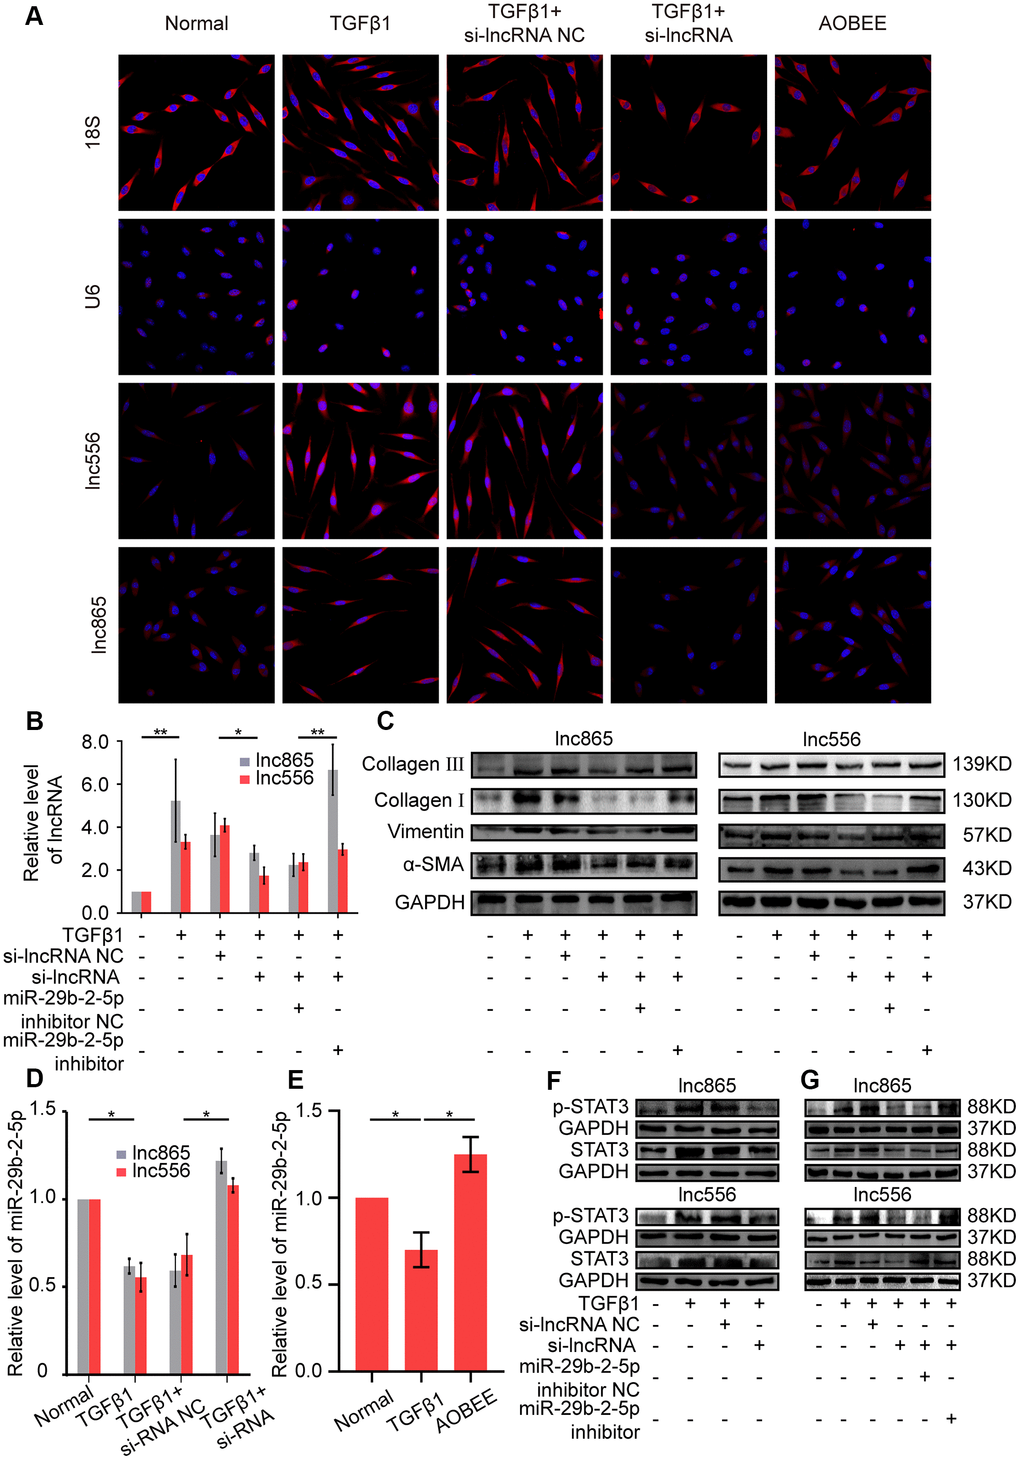 AOBEE attenuated pulmonary fibrosis by blocking the lnc865/lnc556–miR-29b-2-5p–STAT3 axis. (A) RNA-FISH showed that lnc865 and lnc556 mainly existed in the cytoplasm, and AOBEE induced a decrease of their expression but did not cause their translocation. (B) The rescue experiments reflected that si-lnc865 and si-lnc556 decreased lnc865 and lnc556 expression, but the miR-29b-2-5p inhibitor increased their expression. (C) The rescue experiments showed that si-lnc865 and si-lnc556 induced a substantial decrease of vimentin, α-SMA, and collagen I and III, but the miR-29b-2-5p inhibitor induced a substantial increase of the expression of these proteins. (D) RNA interference on lnc865 and lnc556 increased miR-29b-2-5p expression. (E) AOBEE promoted miR-29b-2-5p expression. (F) Western blot revealed that si-lnc865 and si-lnc556 decreased STAT3 and p-STAT3 expression. (G) The rescue experiments demonstrated that the miR-29b-2-5p inhibitor reversed the effects of si-lnc865 and si-lnc556. Each bar represents the mean ± SD, n = 6; *p 